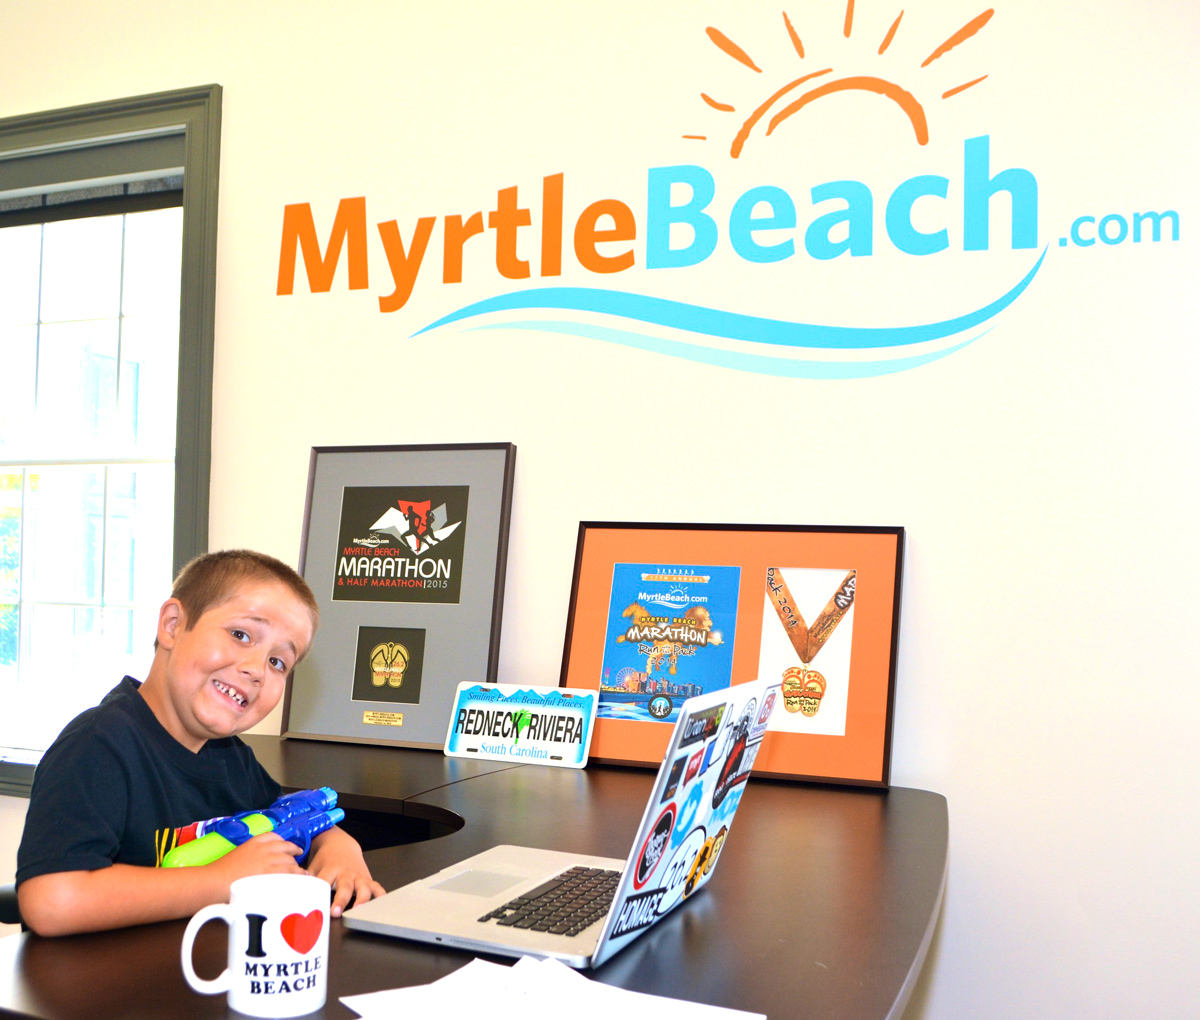 The funnest things to do in Myrtle Beach as told by a 7-year-old